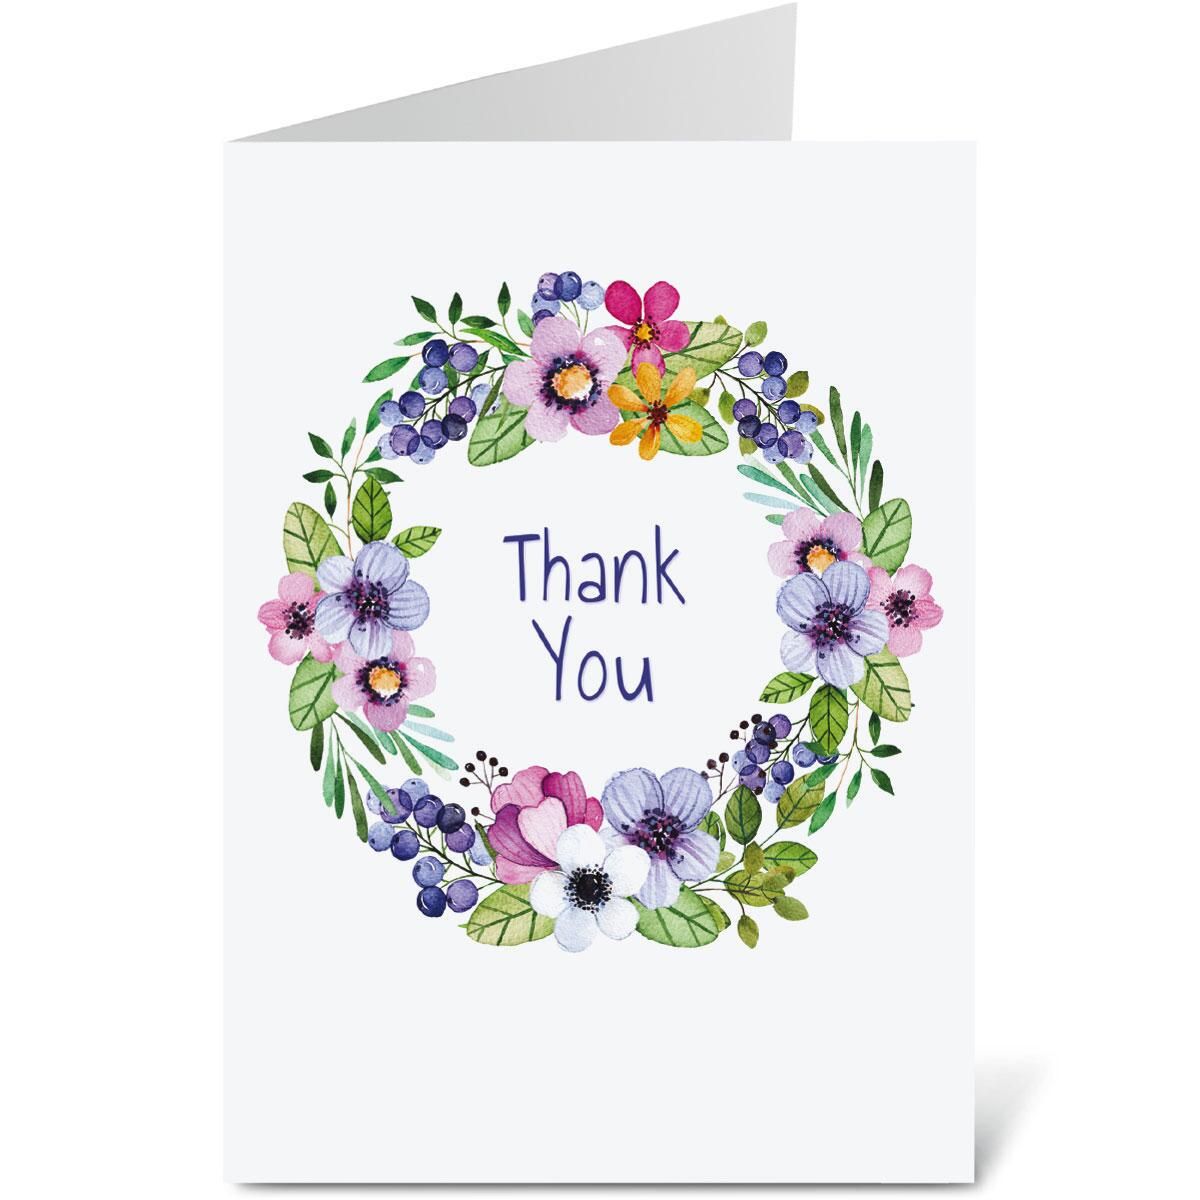 Thank You Notes by Current Catalog